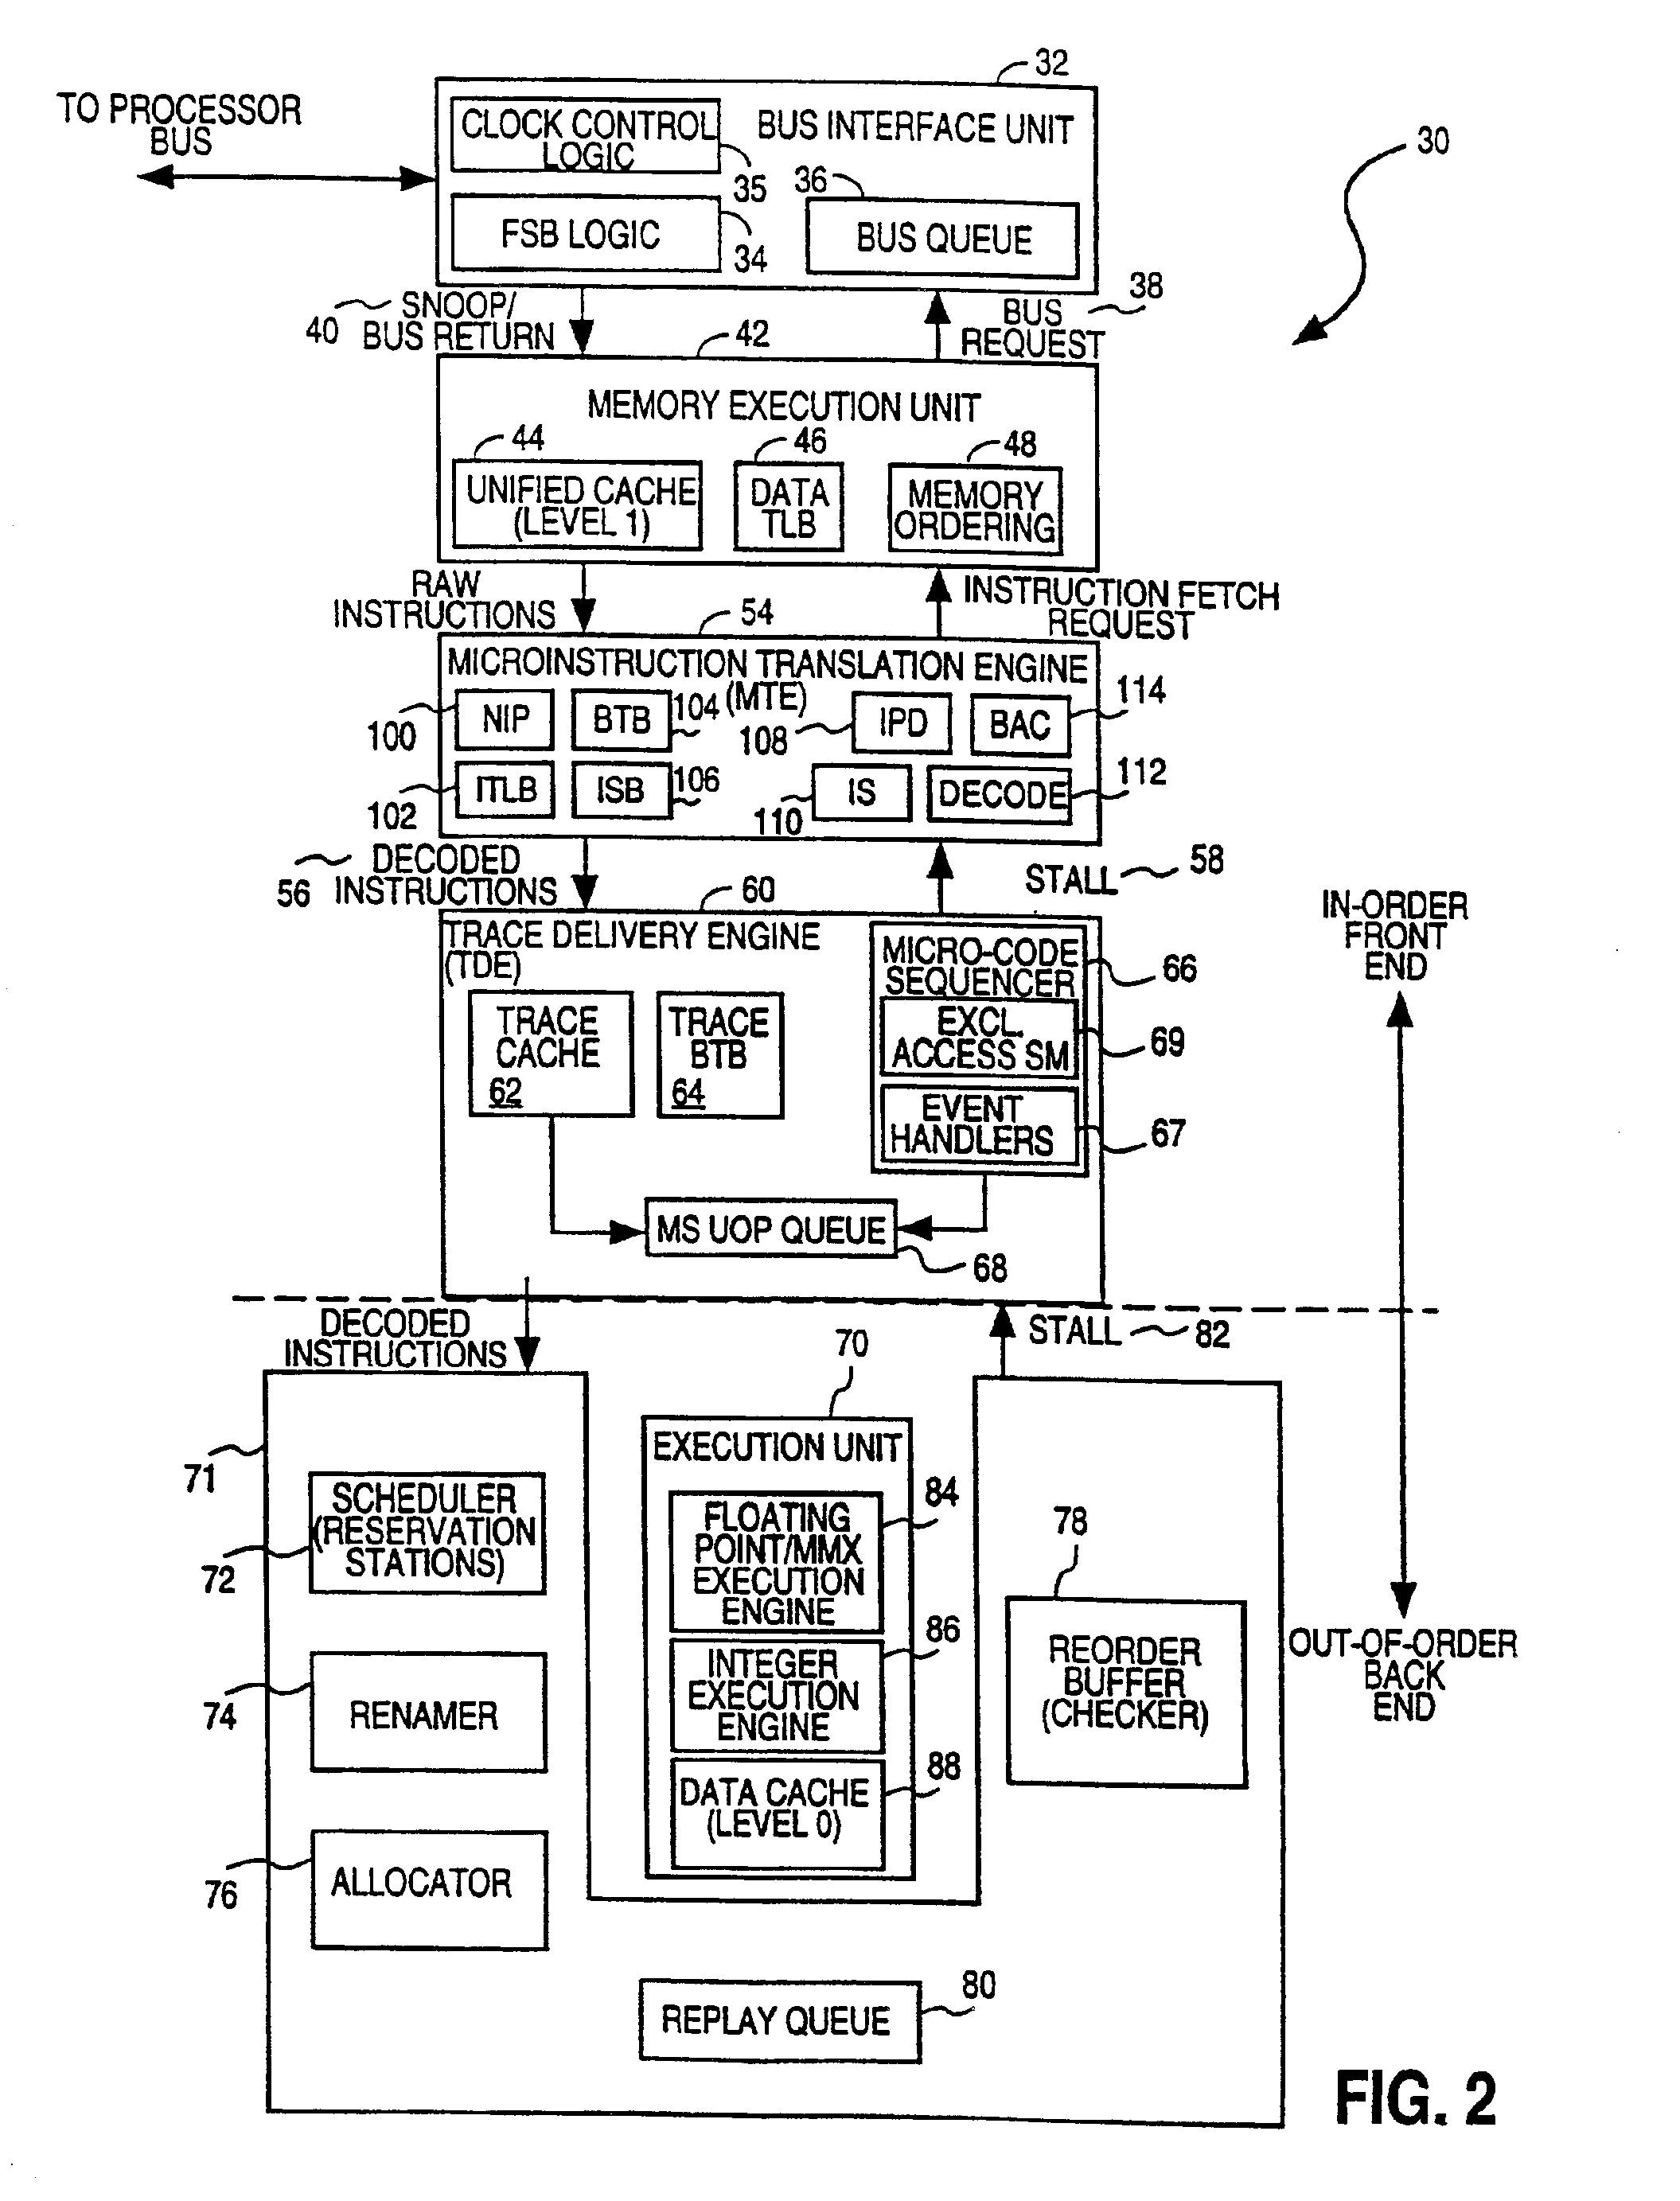 Method and apparatus for disabling a clock signal within a multithreaded processor